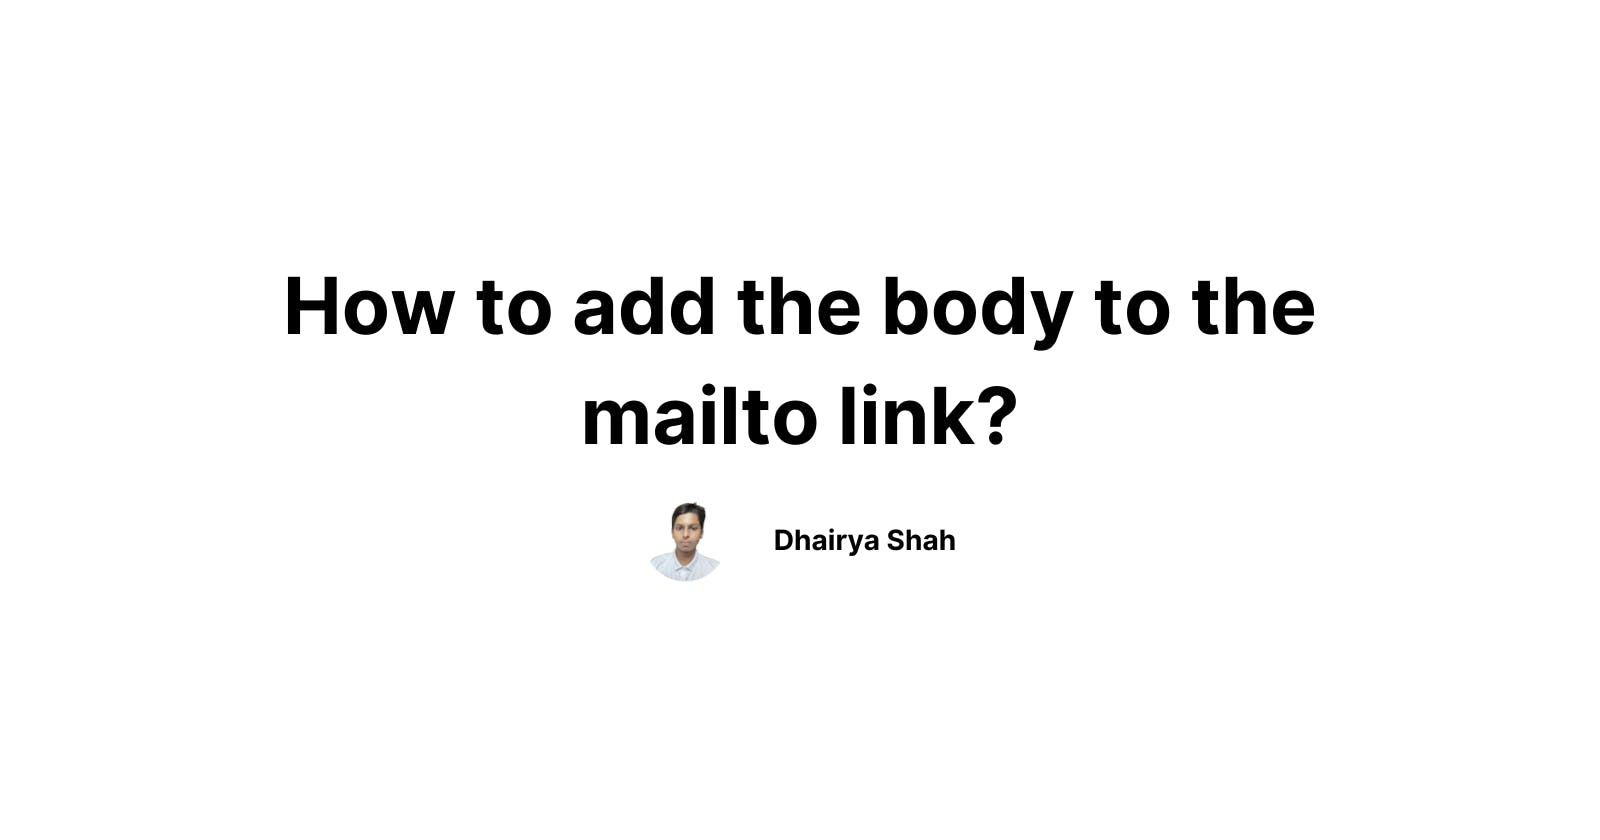 How to add the body to the mailto link?